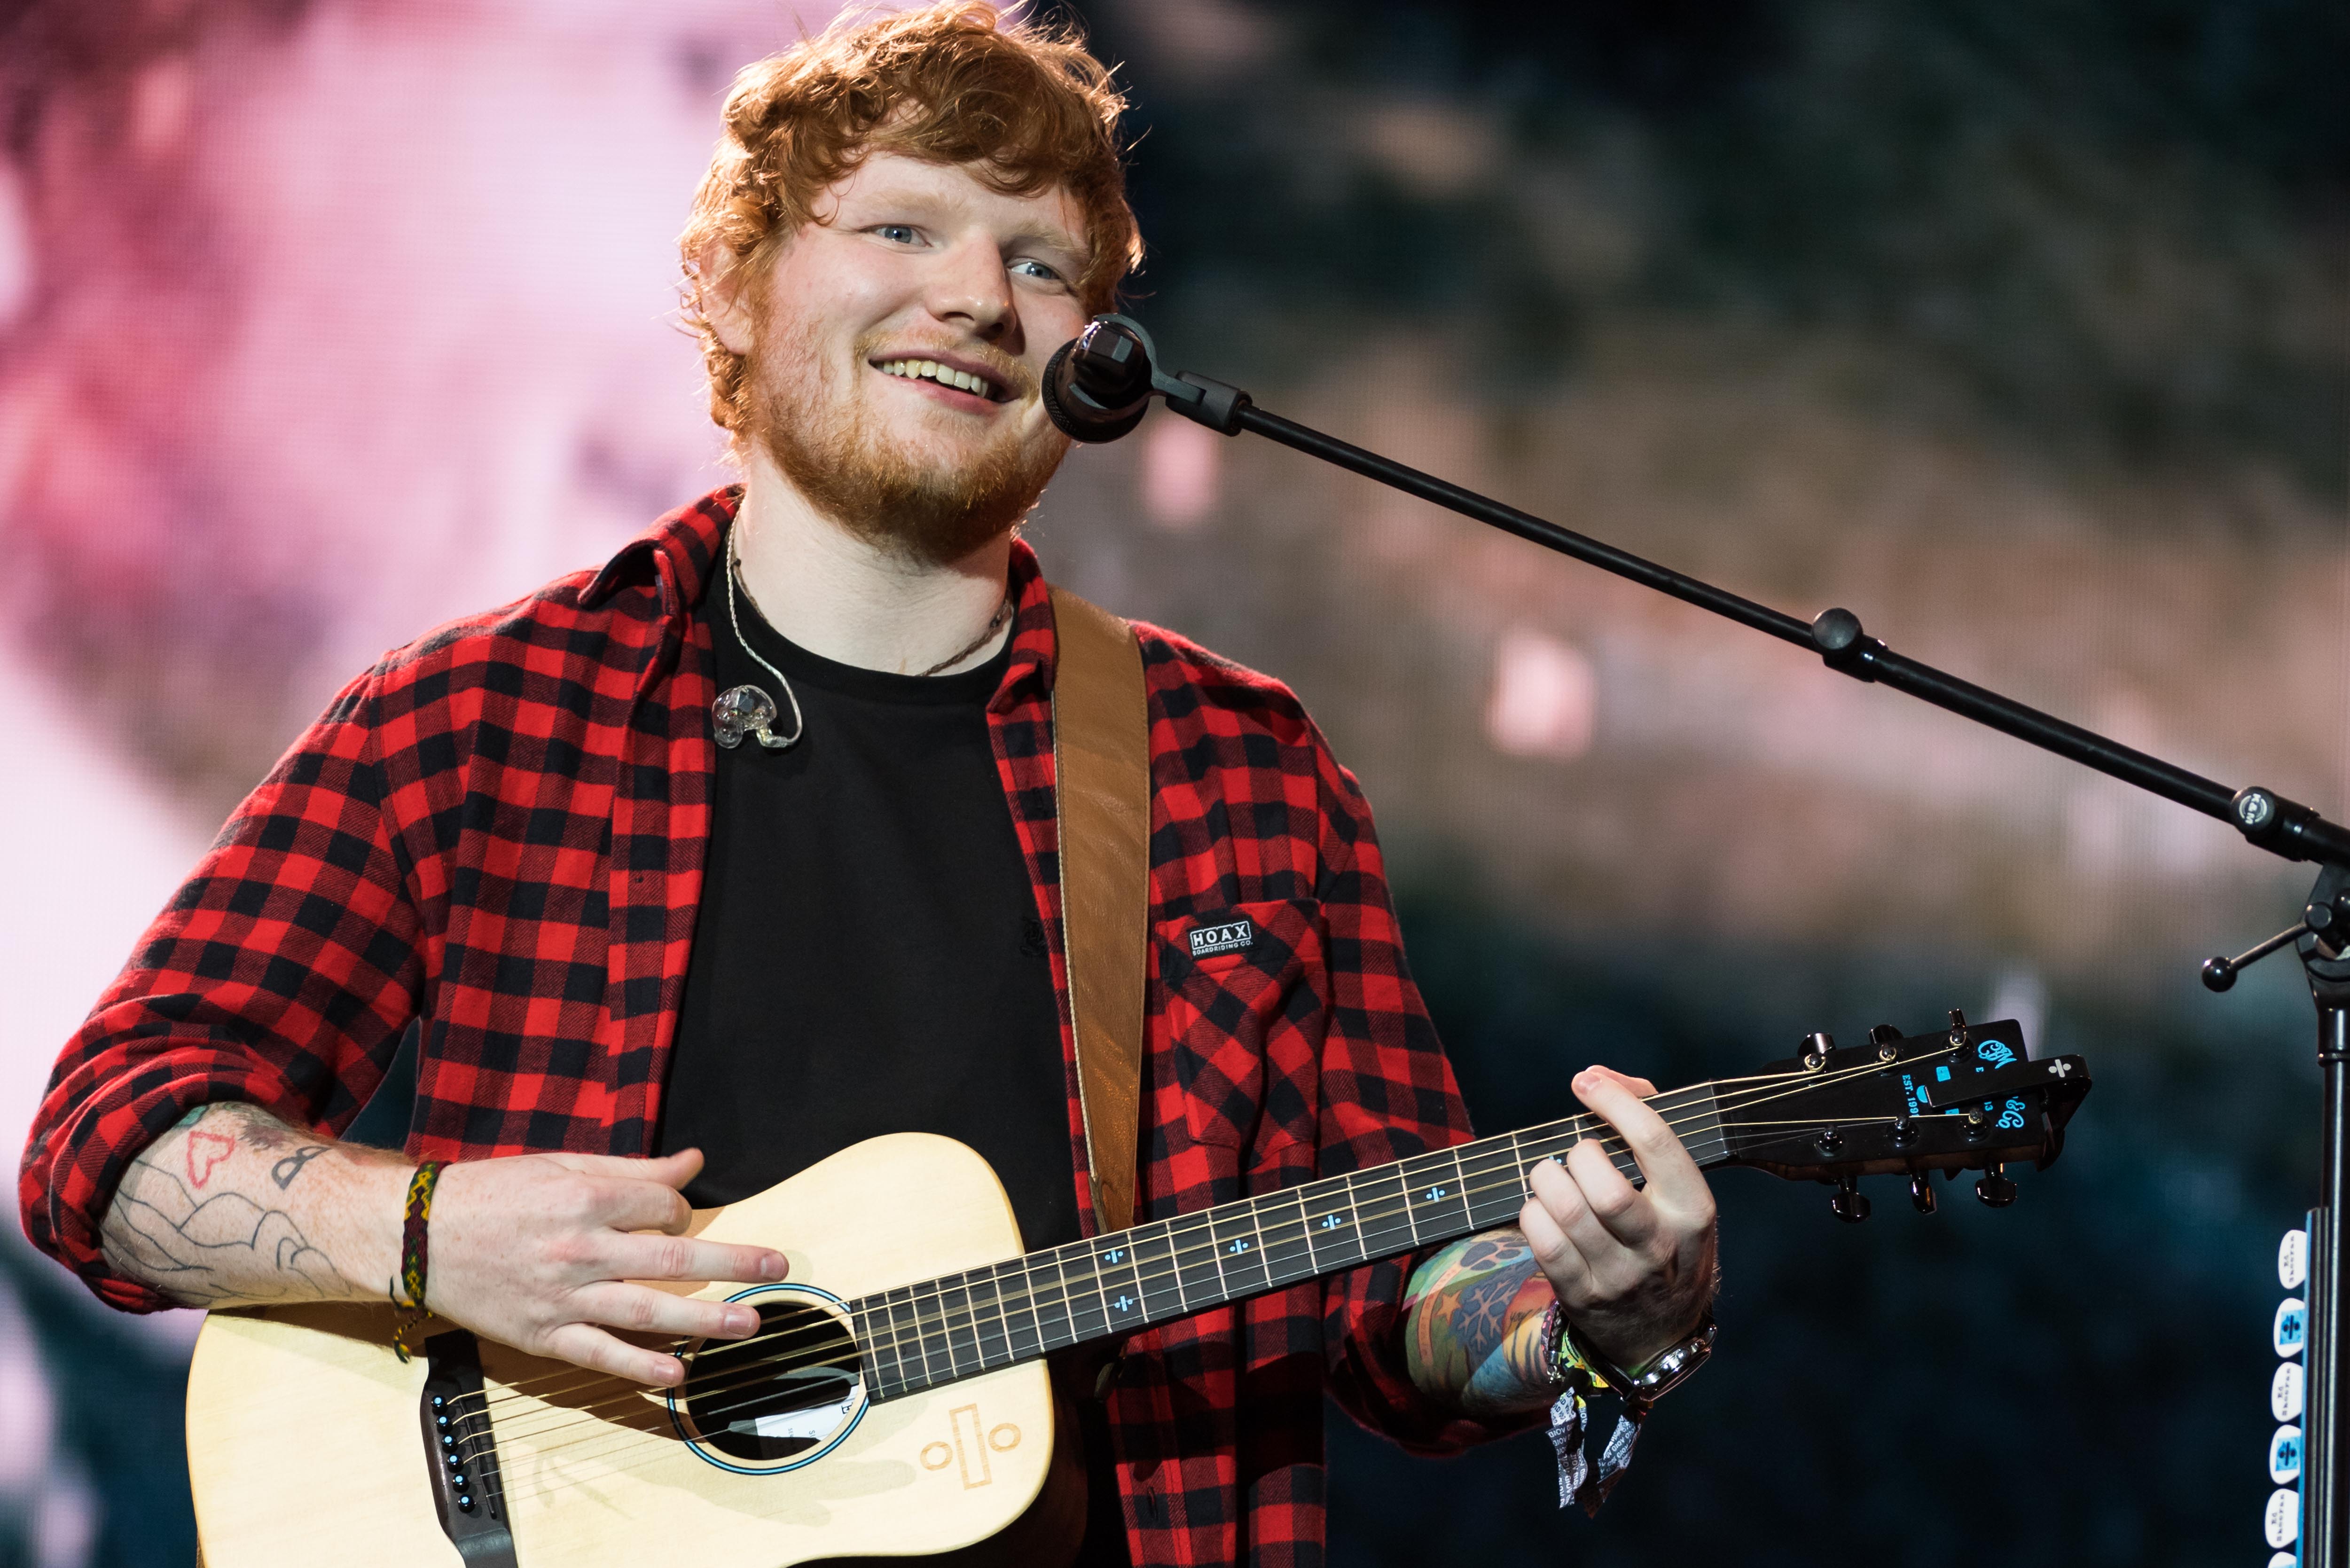 Ed Sheeran headlines on the Pyramid Stage during day 4 of the Glastonbury Festival 2017